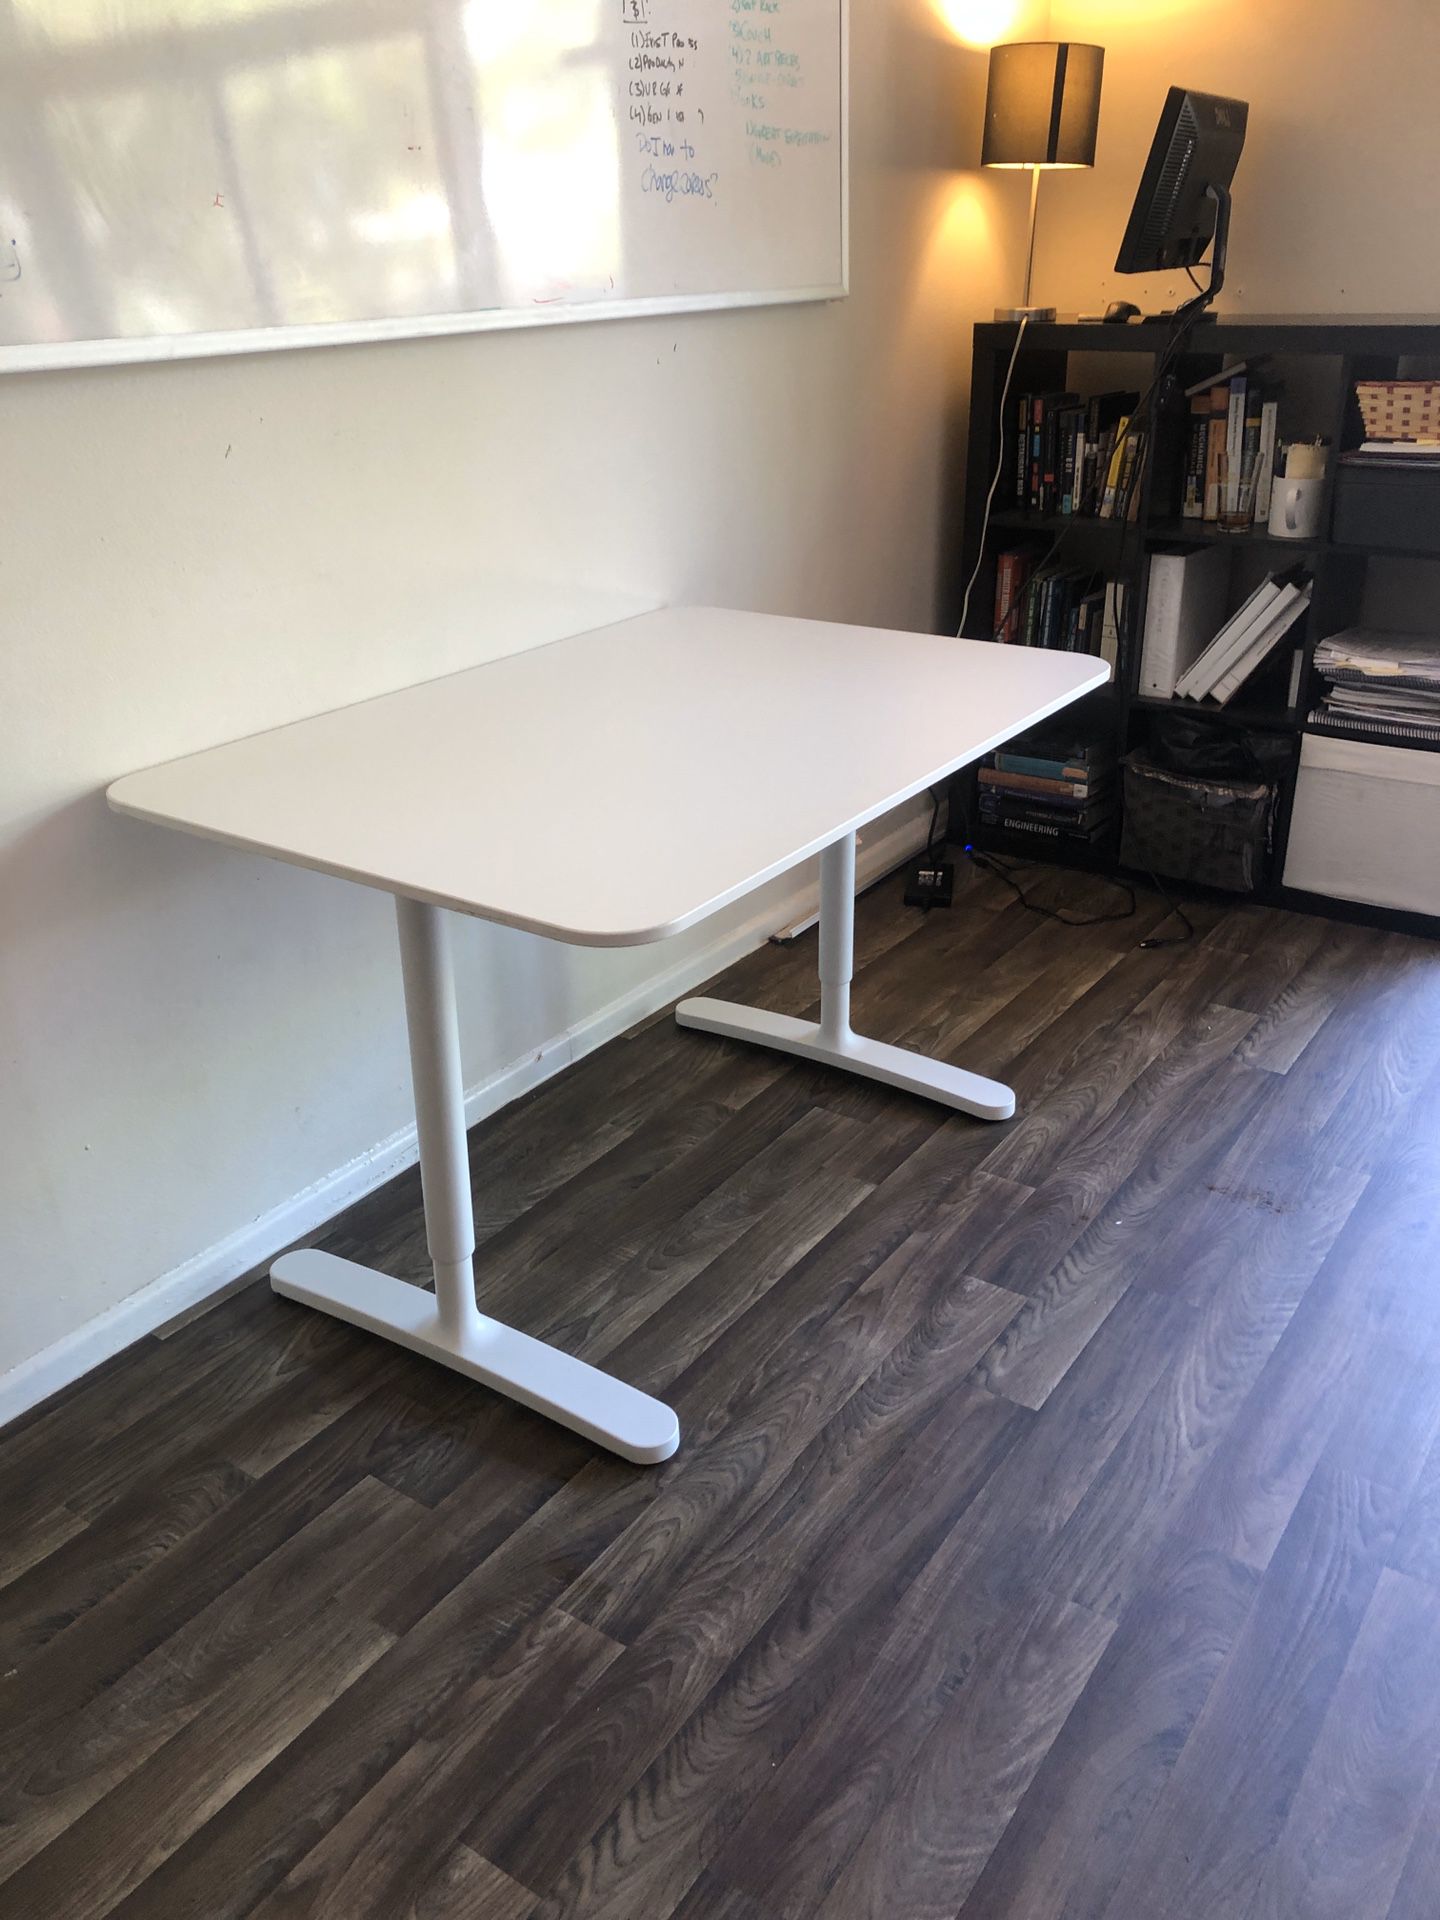 BEKANT IKEA Office Desk — 47 1/4” x 31 1/2” with Adjustable Height.